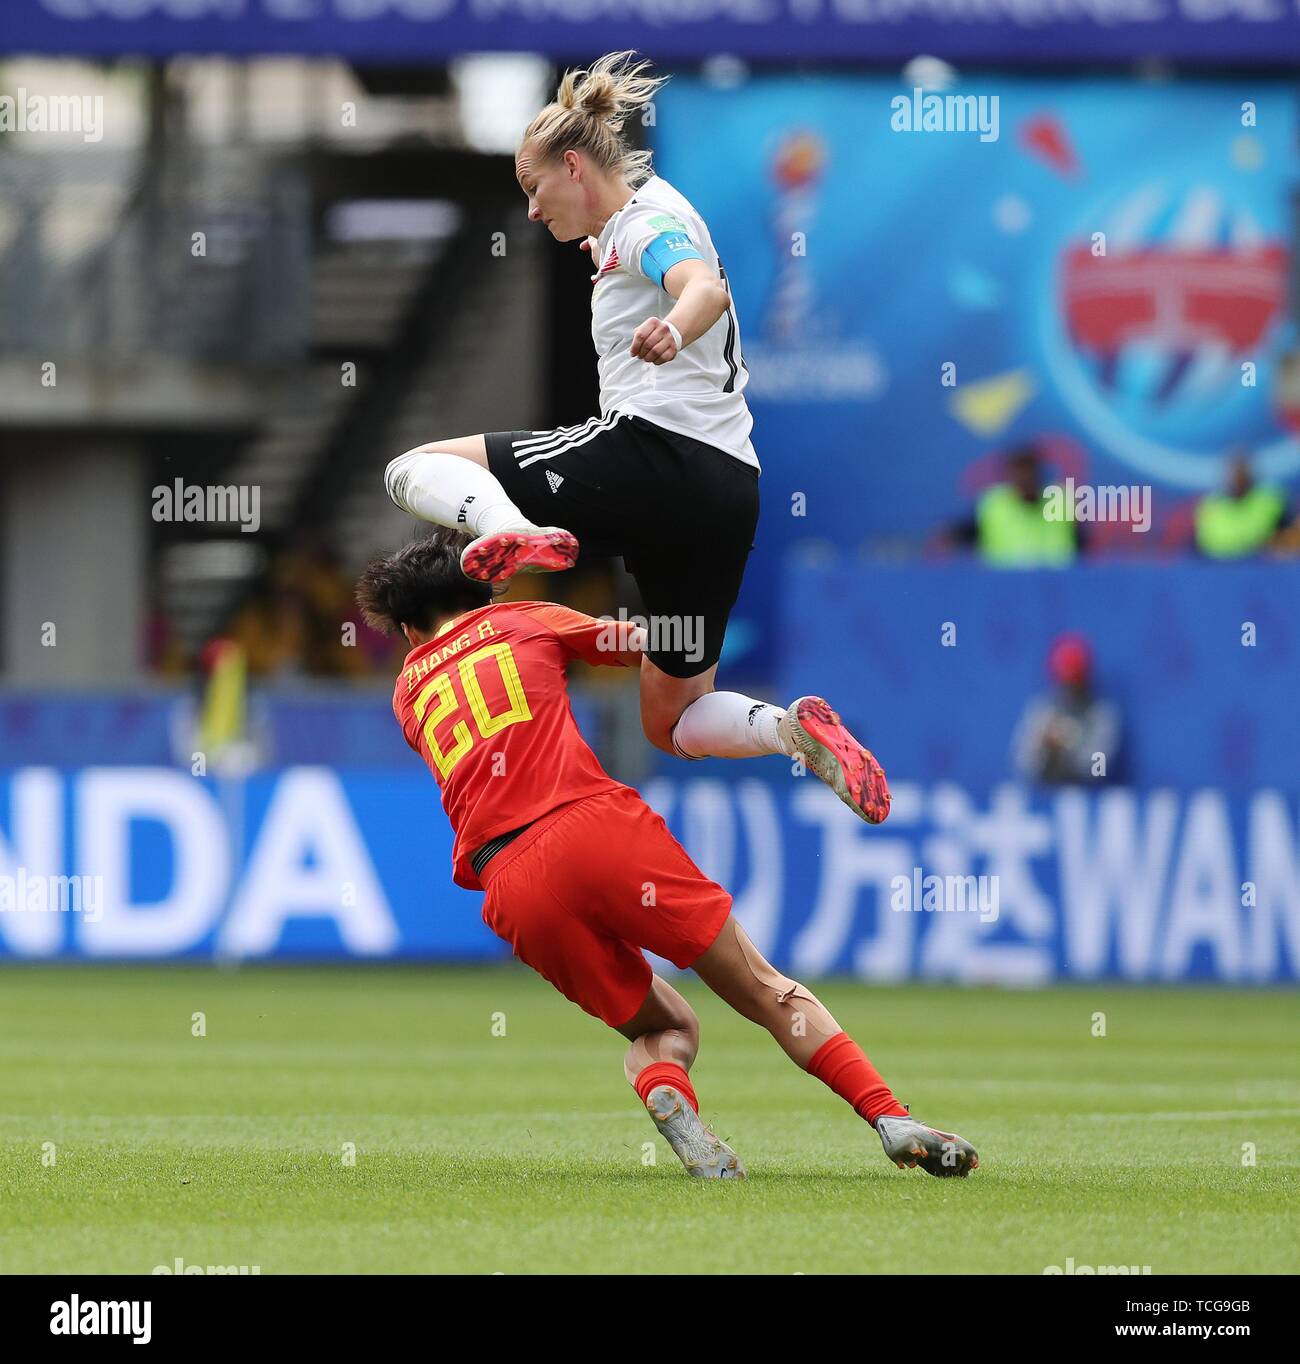 Rennes, France. 08th June, 2019. firo: 08.06.2019, Football, Women, Ladies, 2018/2019, FIFA World Cup in France, Women's World Cup, National Team, Germany, GER - China 1: 0 Hurde taken, Alexandra POPP, GER on ZHANG | usage worldwide Credit: dpa/Alamy Live News Stock Photo